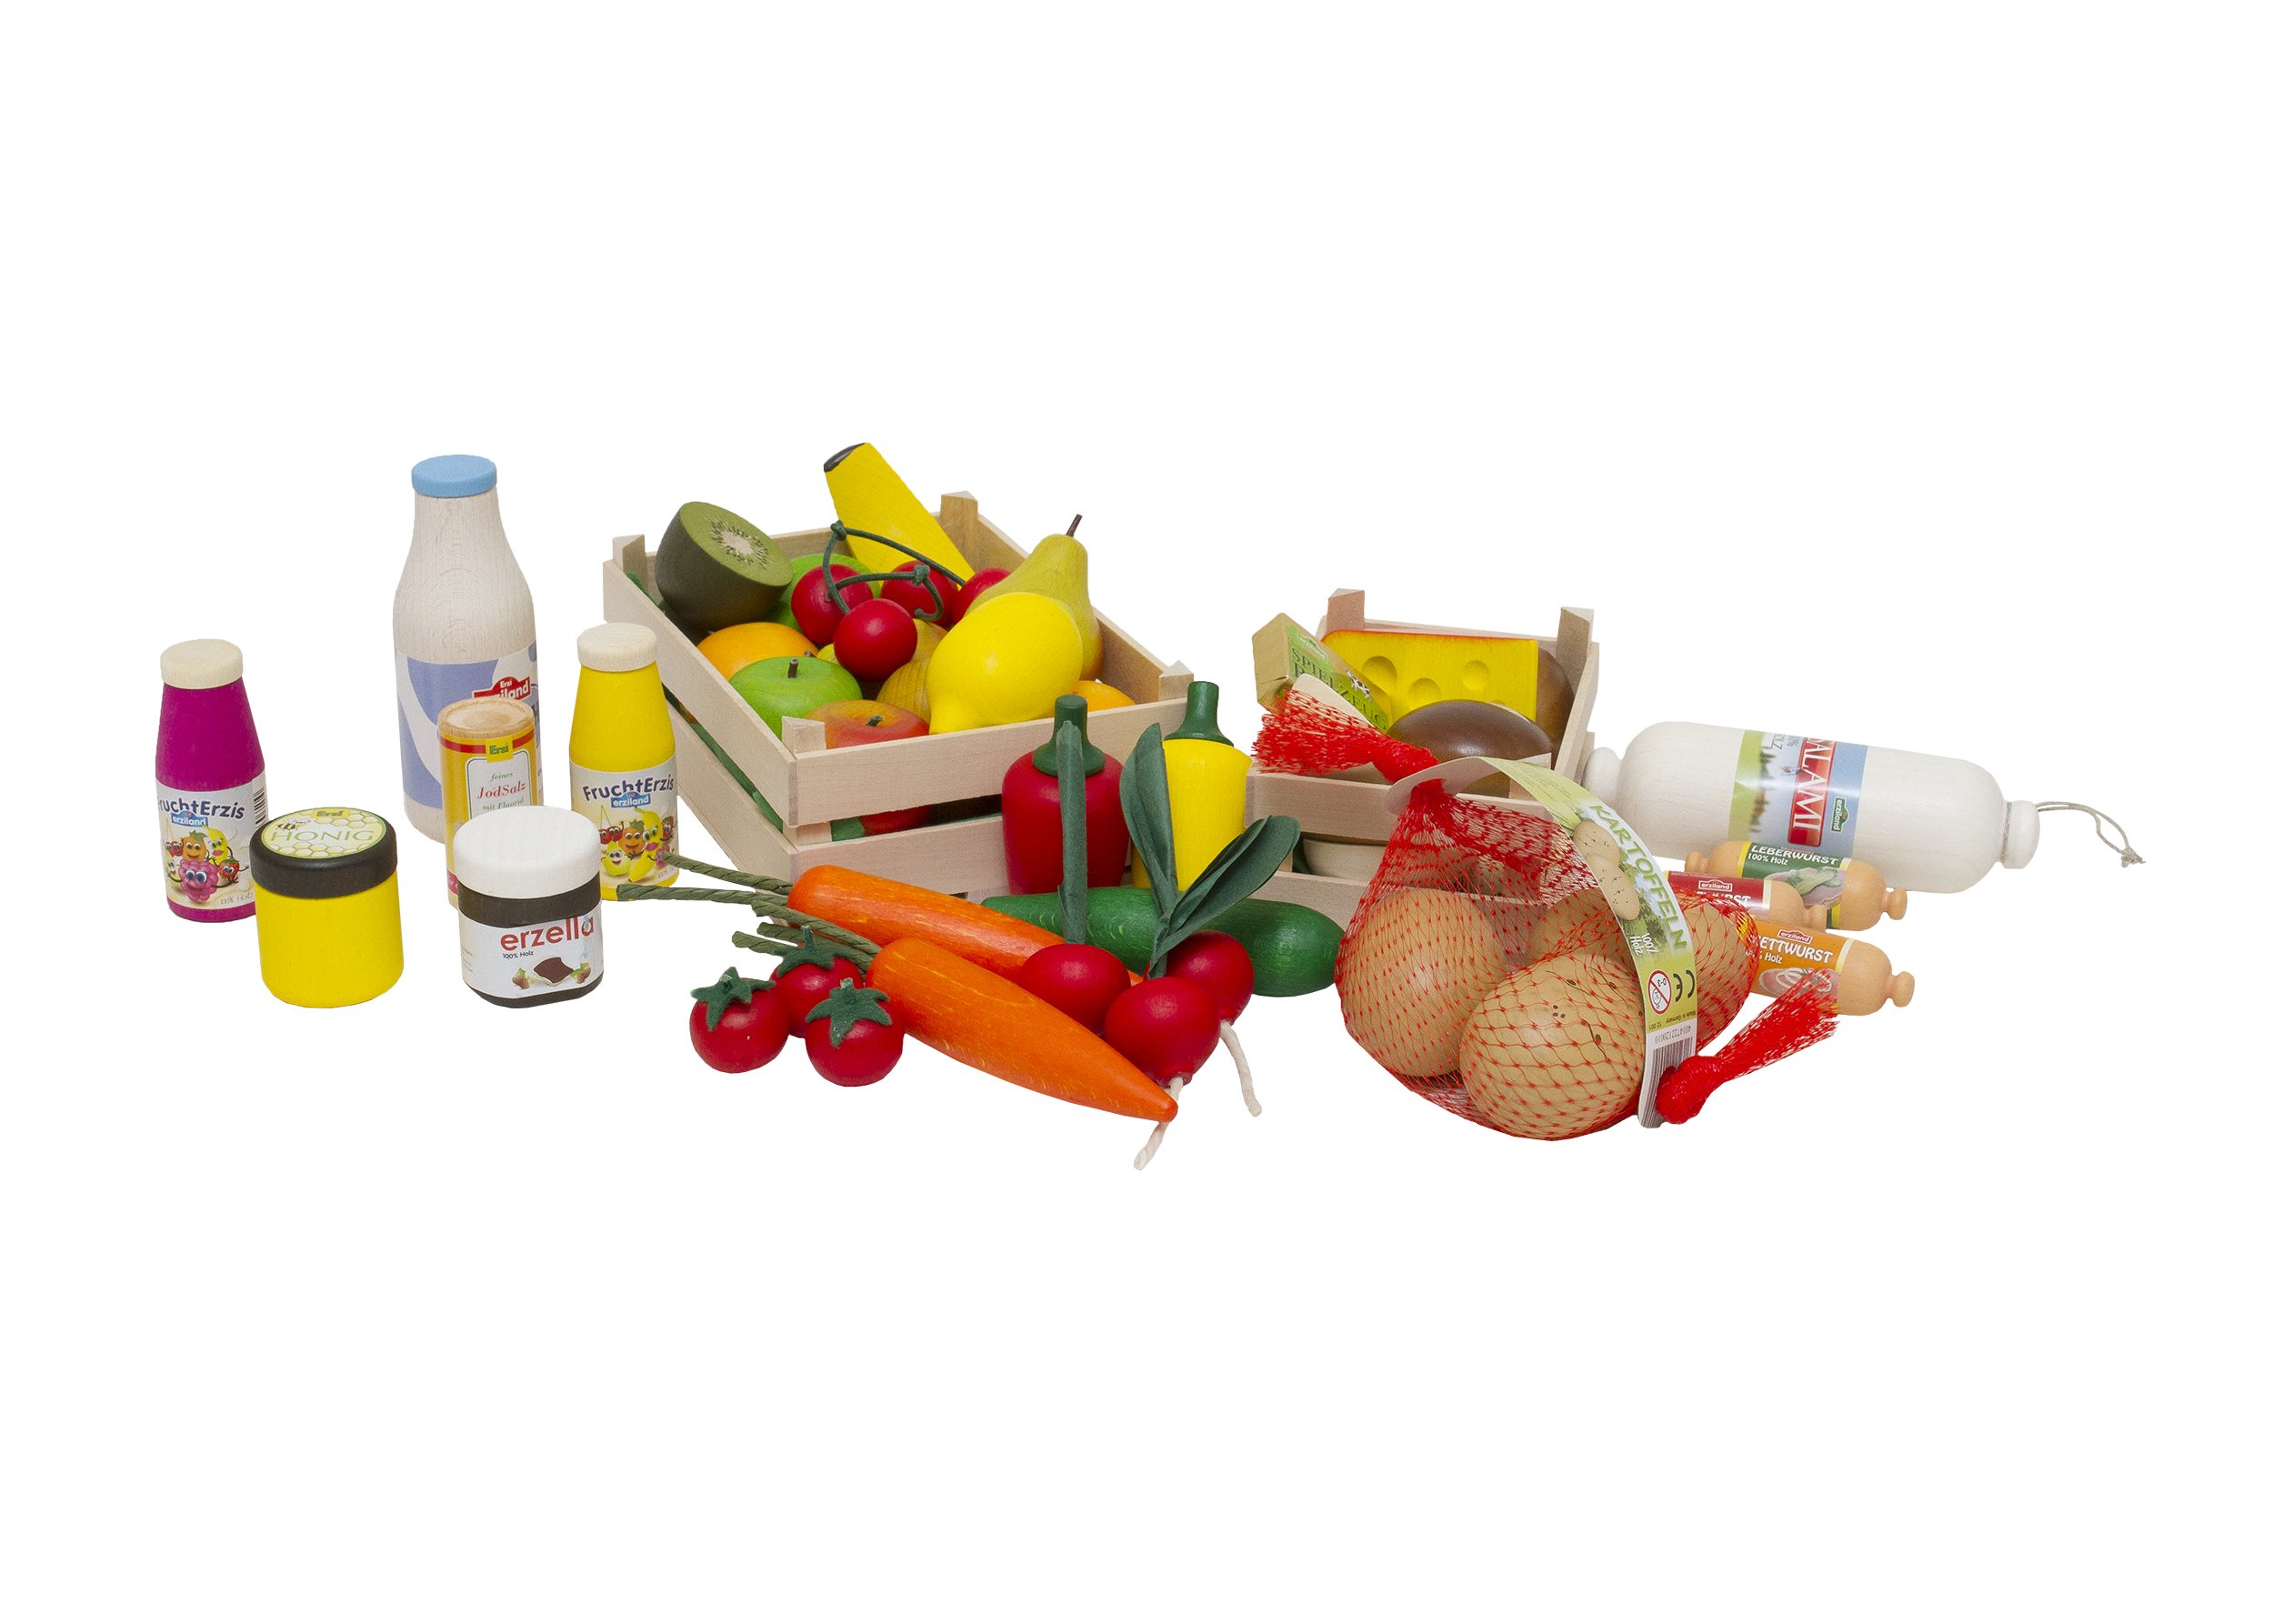 Produce crate (dramatic play)